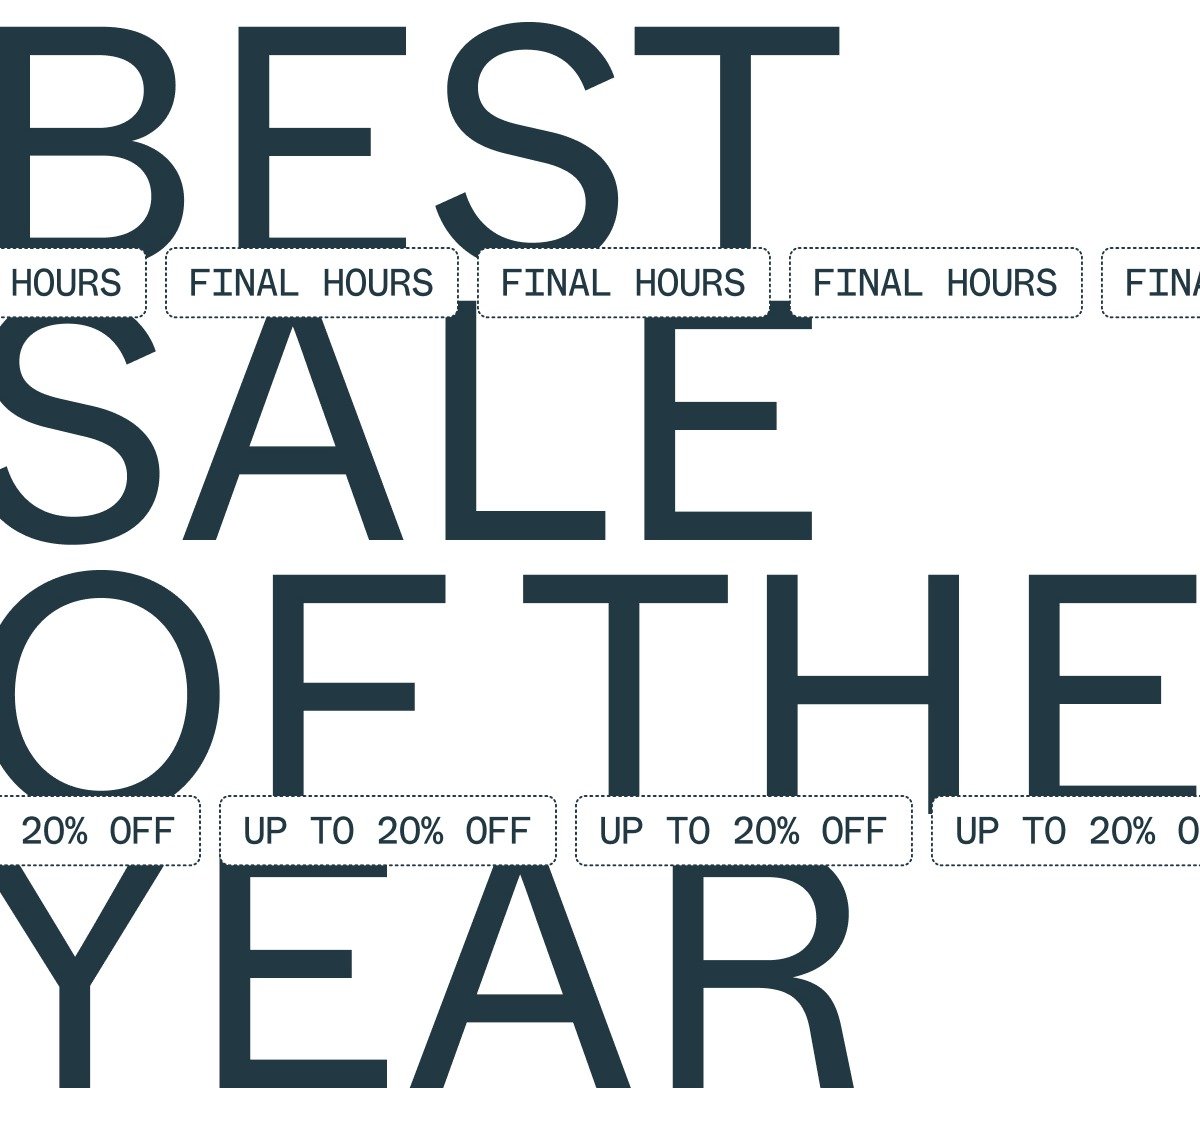 best sale of the year. Final Hours. Up to 20% off